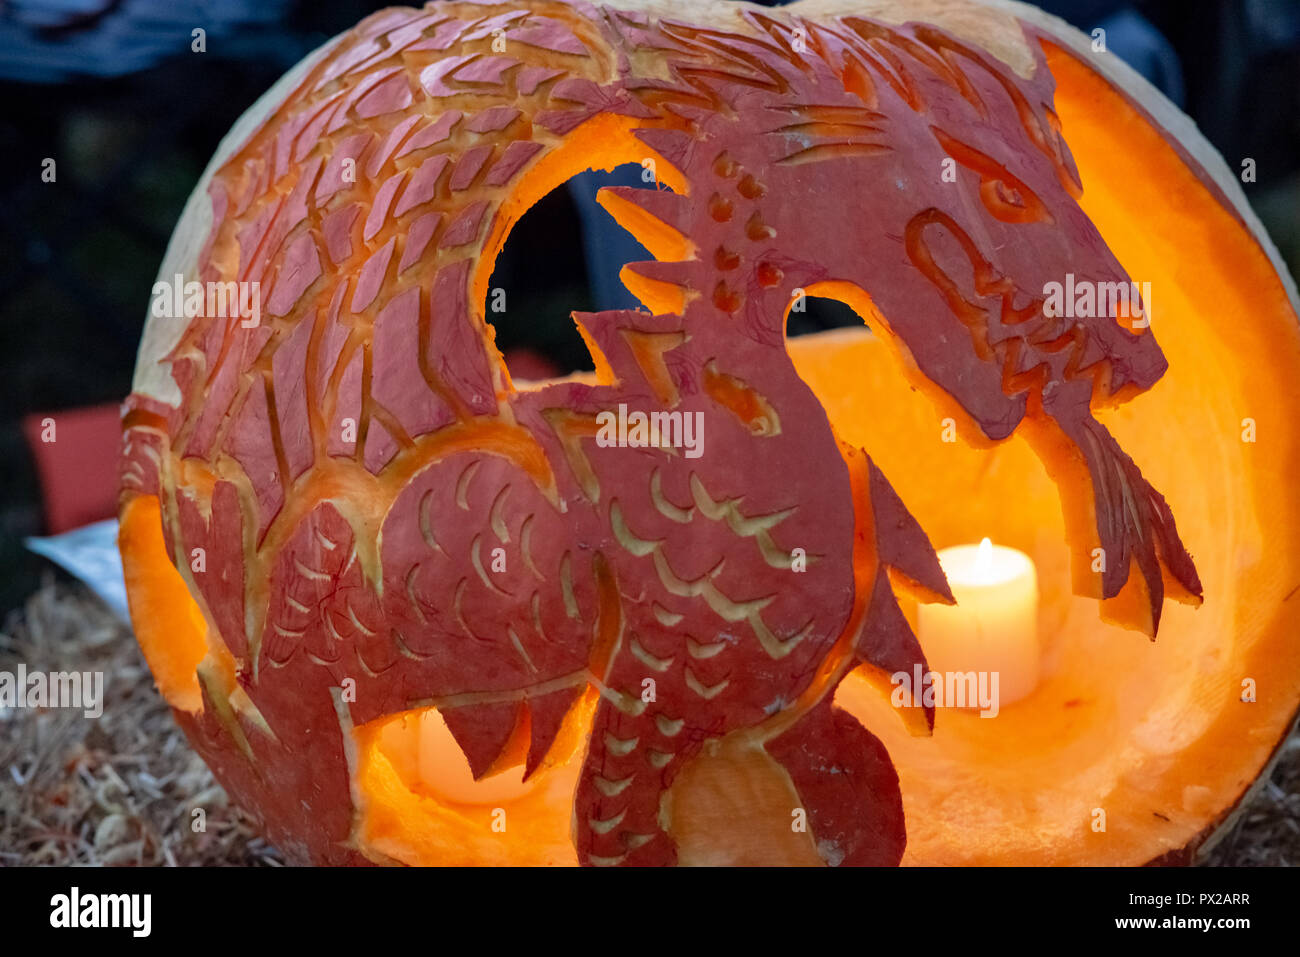 CHADDS FORD, PA - OCTOBER 18: View of Dragon The Great Pumpkin Carve carving contest on October 18, 2018 Stock Photo